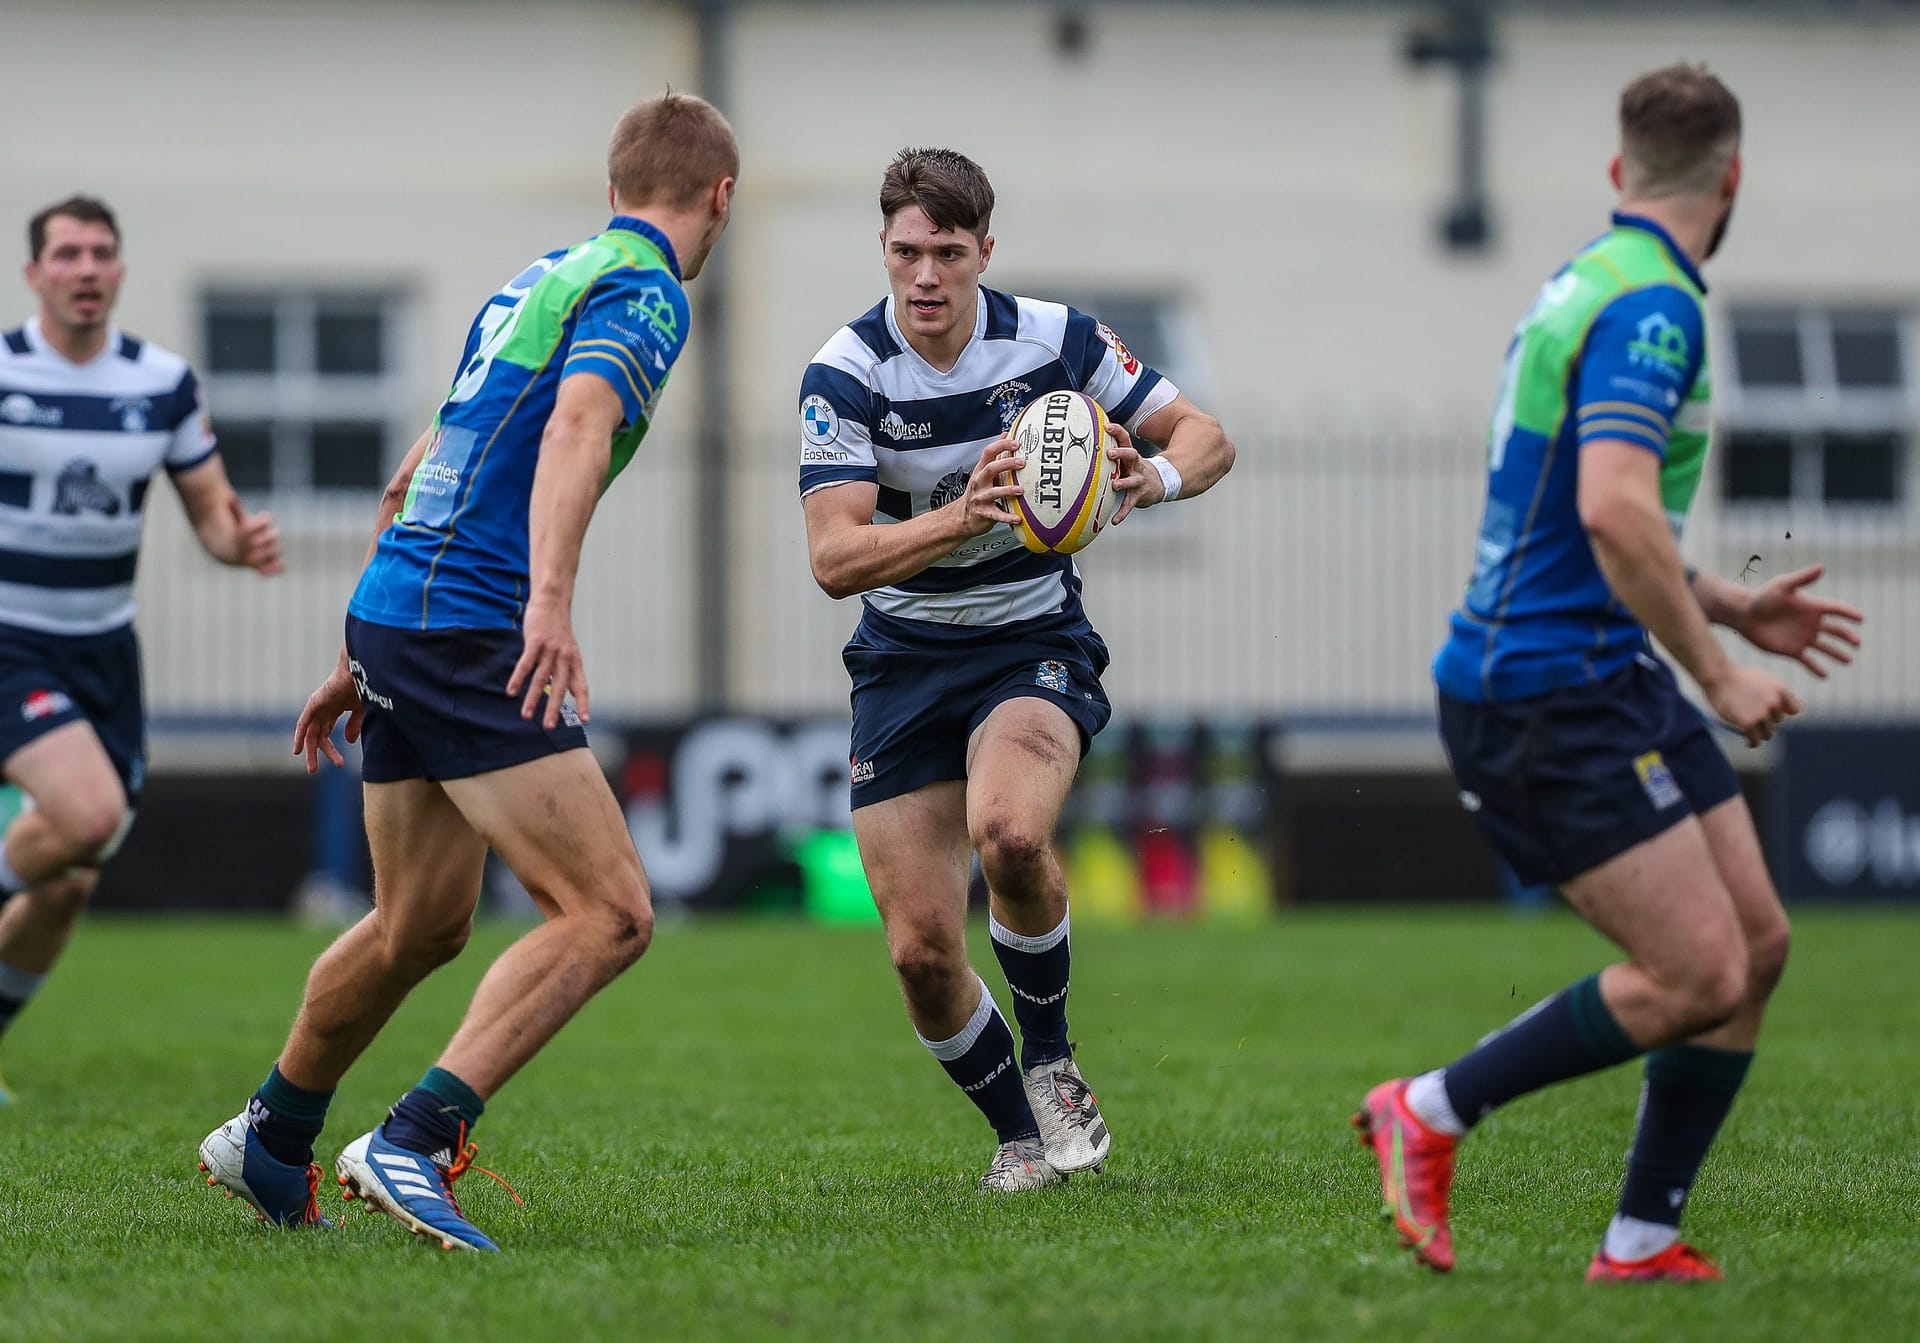 Heriots Ben Evans  looks for a gap in the Boroughmuir defence. FOSROC Super 6 match between Heriot's Rugby and Boroughmuir Bears at Goldenacre, Edinburgh on 09/10/2021. (Photo: 39 Design Photography)